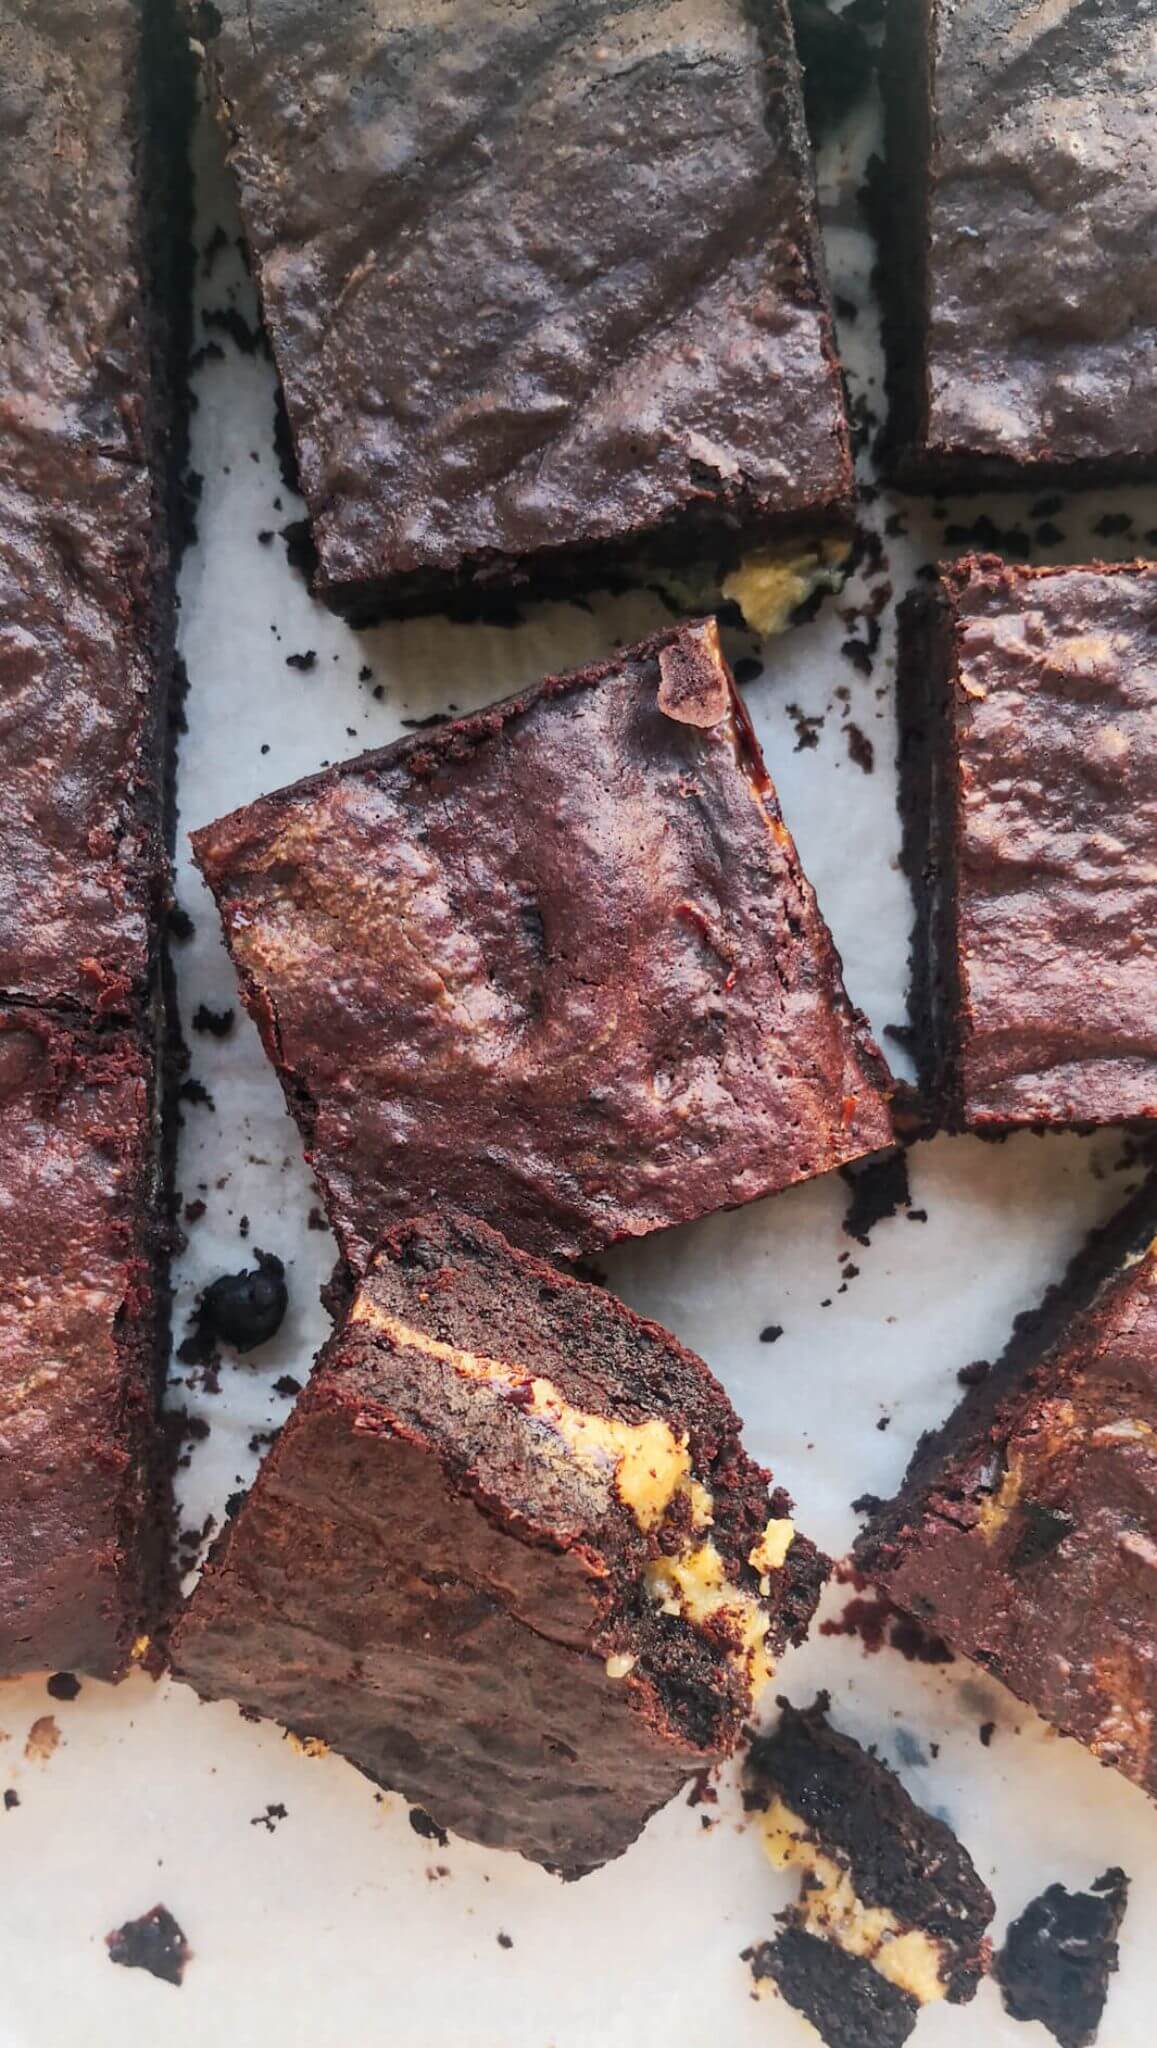 6 pieces of salted caramel brownies on a flat surface.